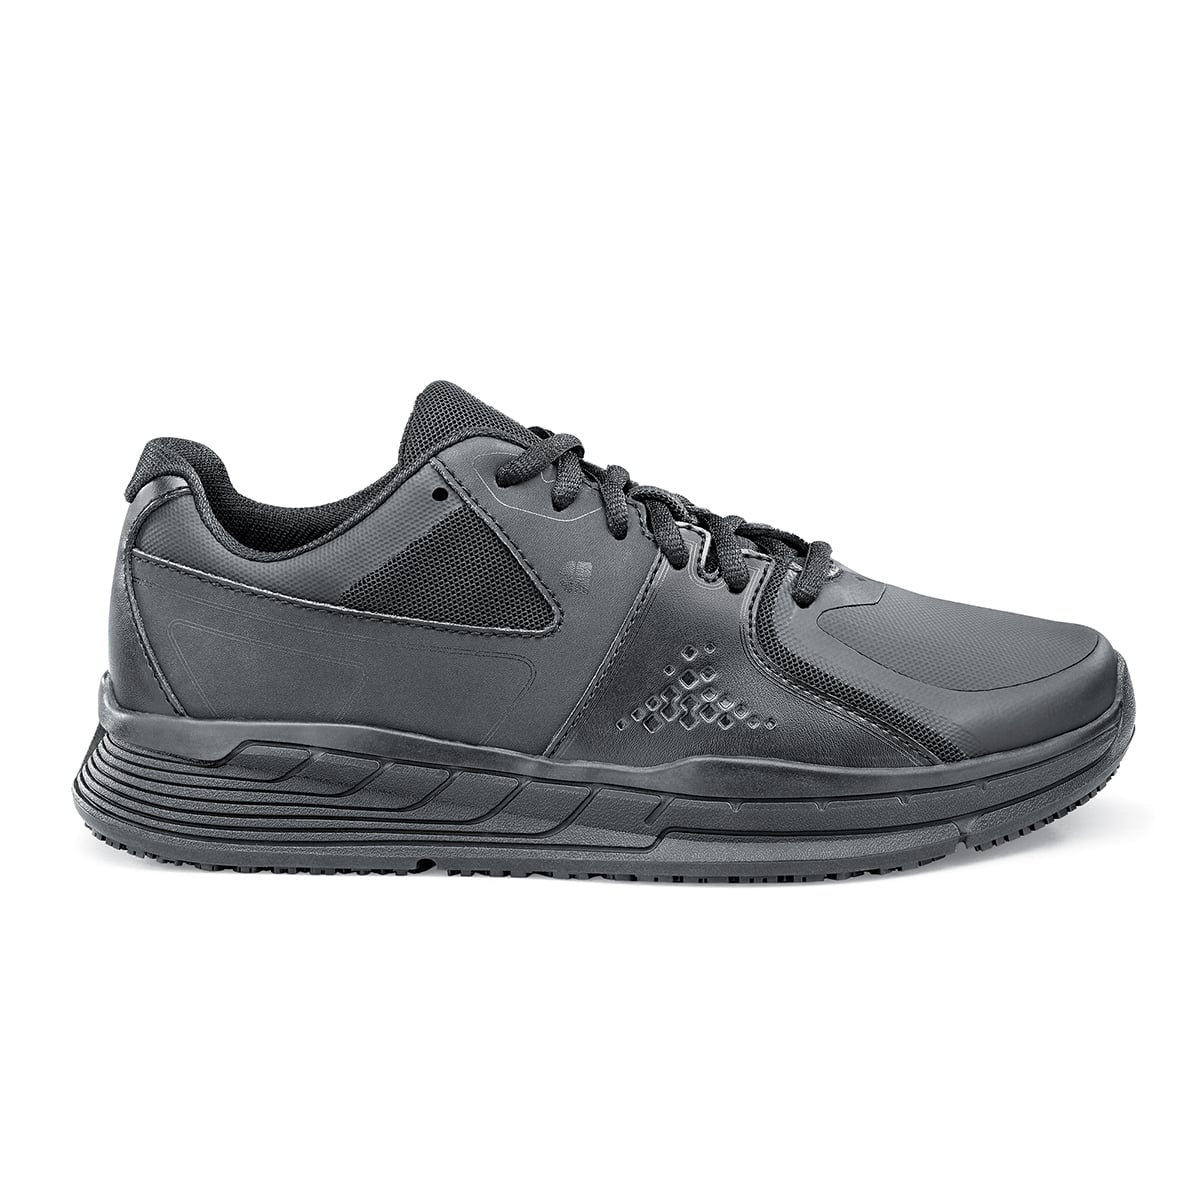 The Condor Women's Black from Shoes for Crews is a slip-resistant shoe with laces, with additional padding and a removable cushioned insole, seen from the right.